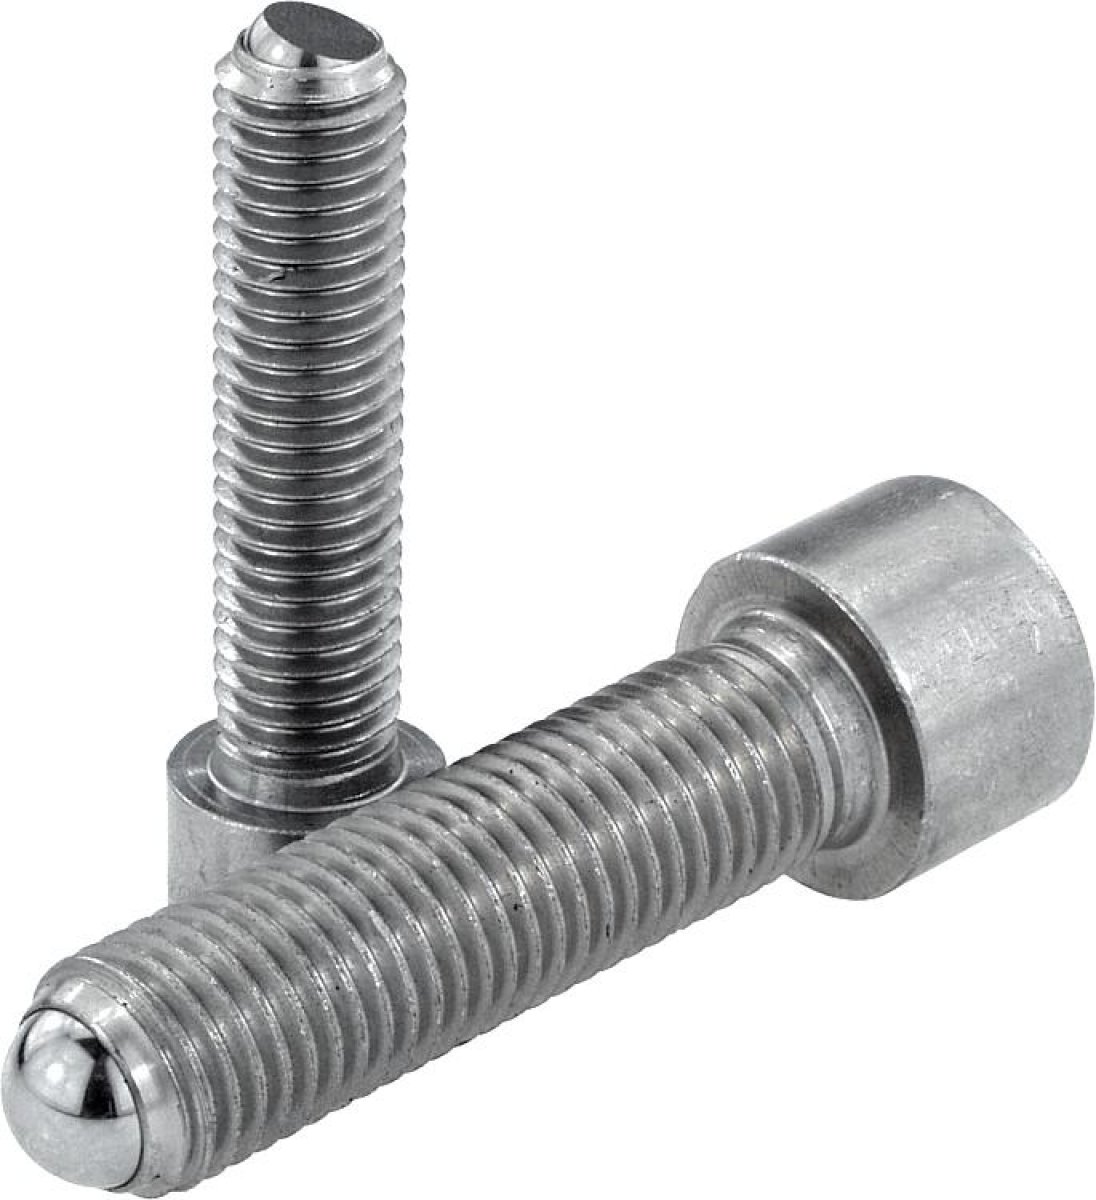 Ball-end thrust screws with head stainless steel